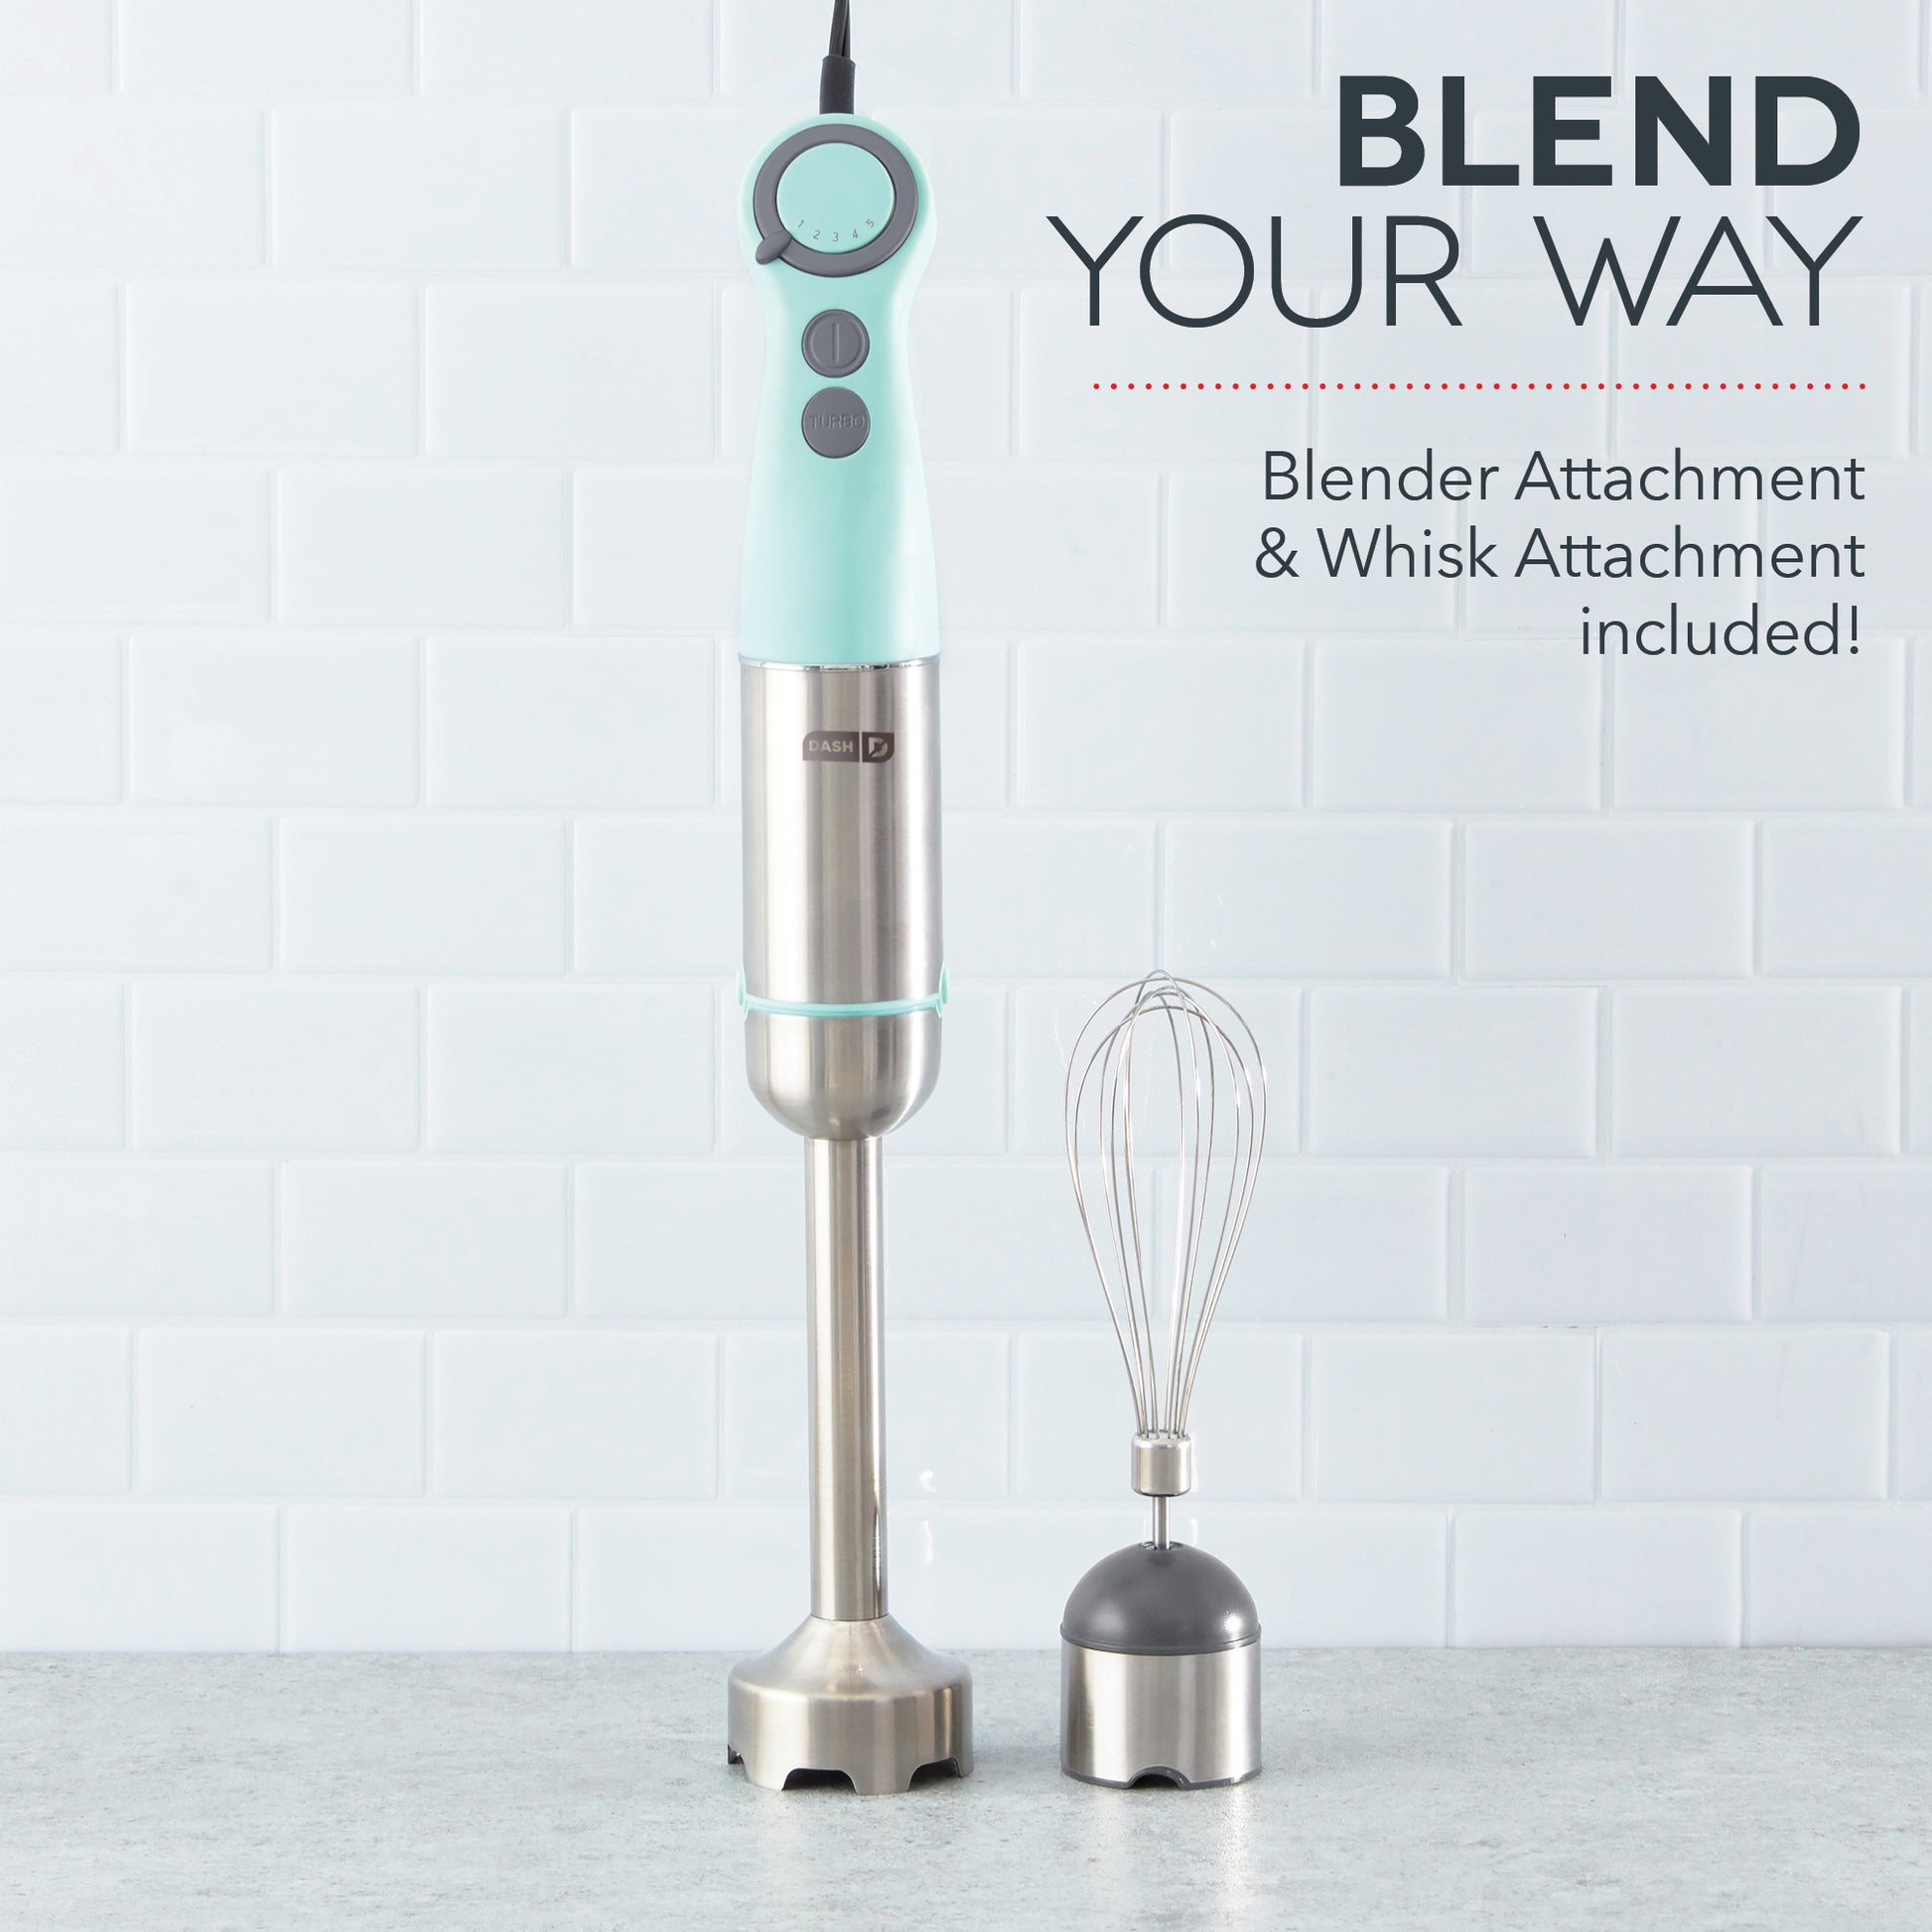 CHEFX 5-in-1 Immersion Blender - 9 Speed Ultra Powerful Stainless